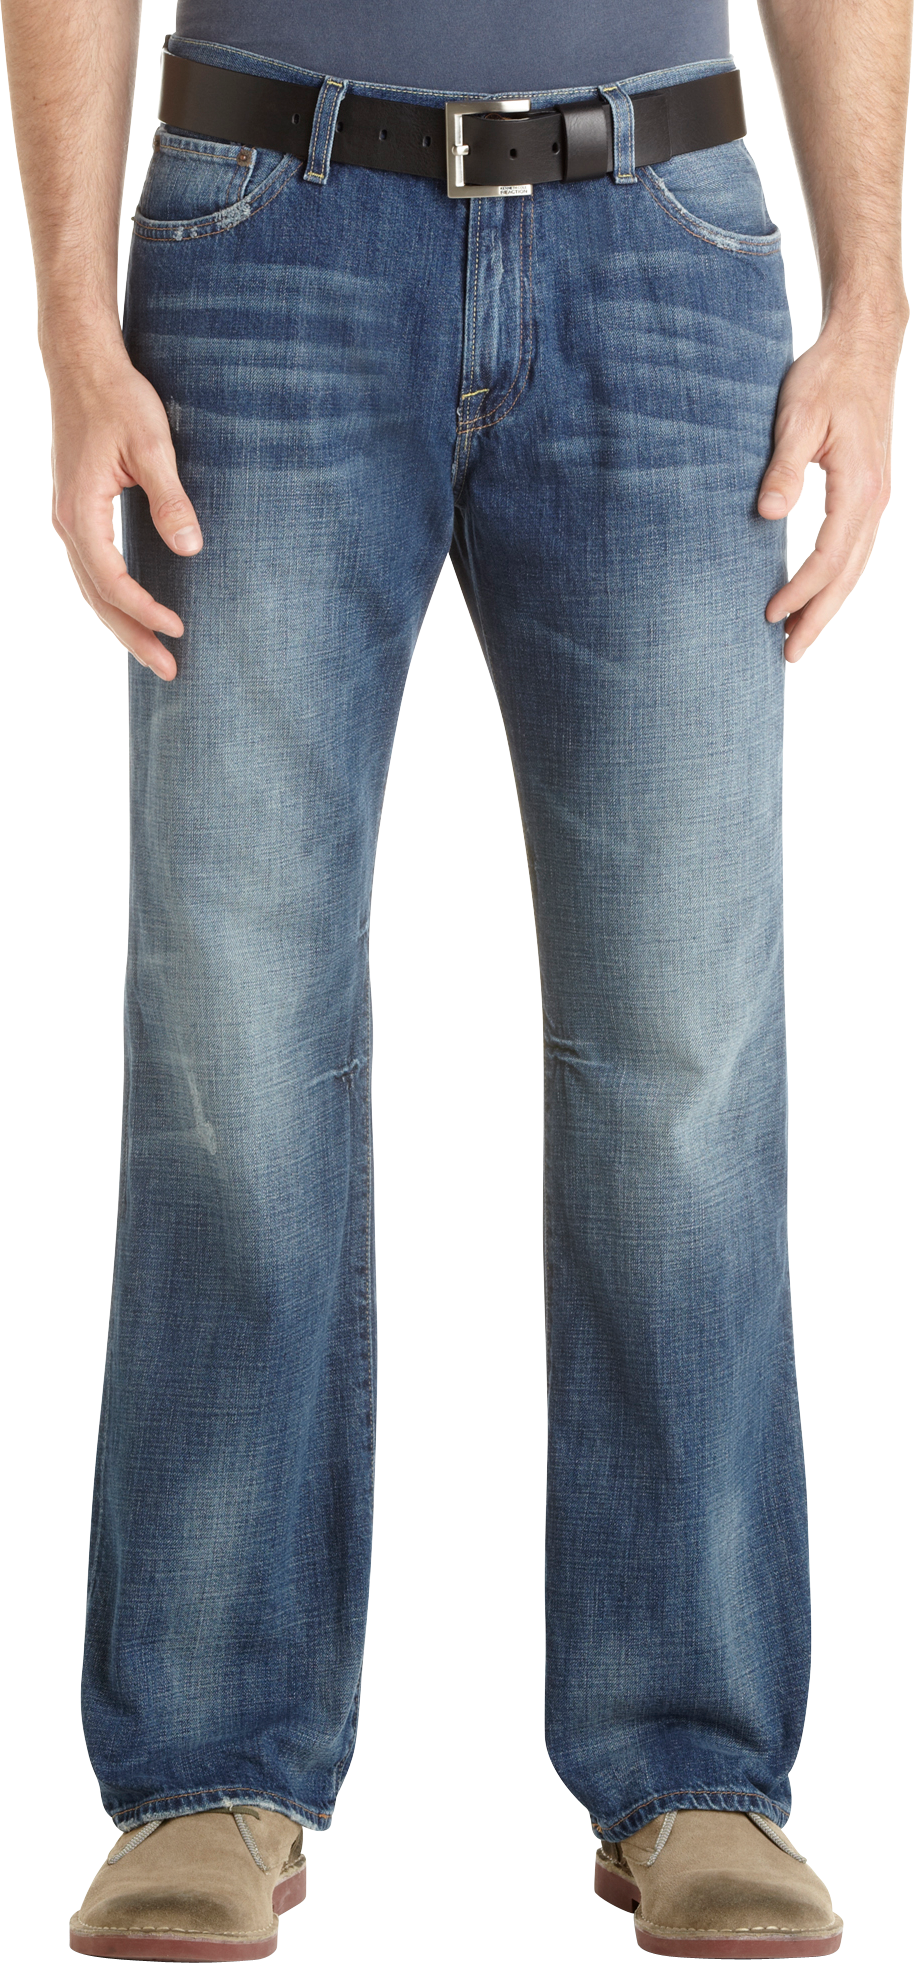 Lucky Brand Faded Blue, Classic Fit Jeans - Men's Big & Tall | Men's ...